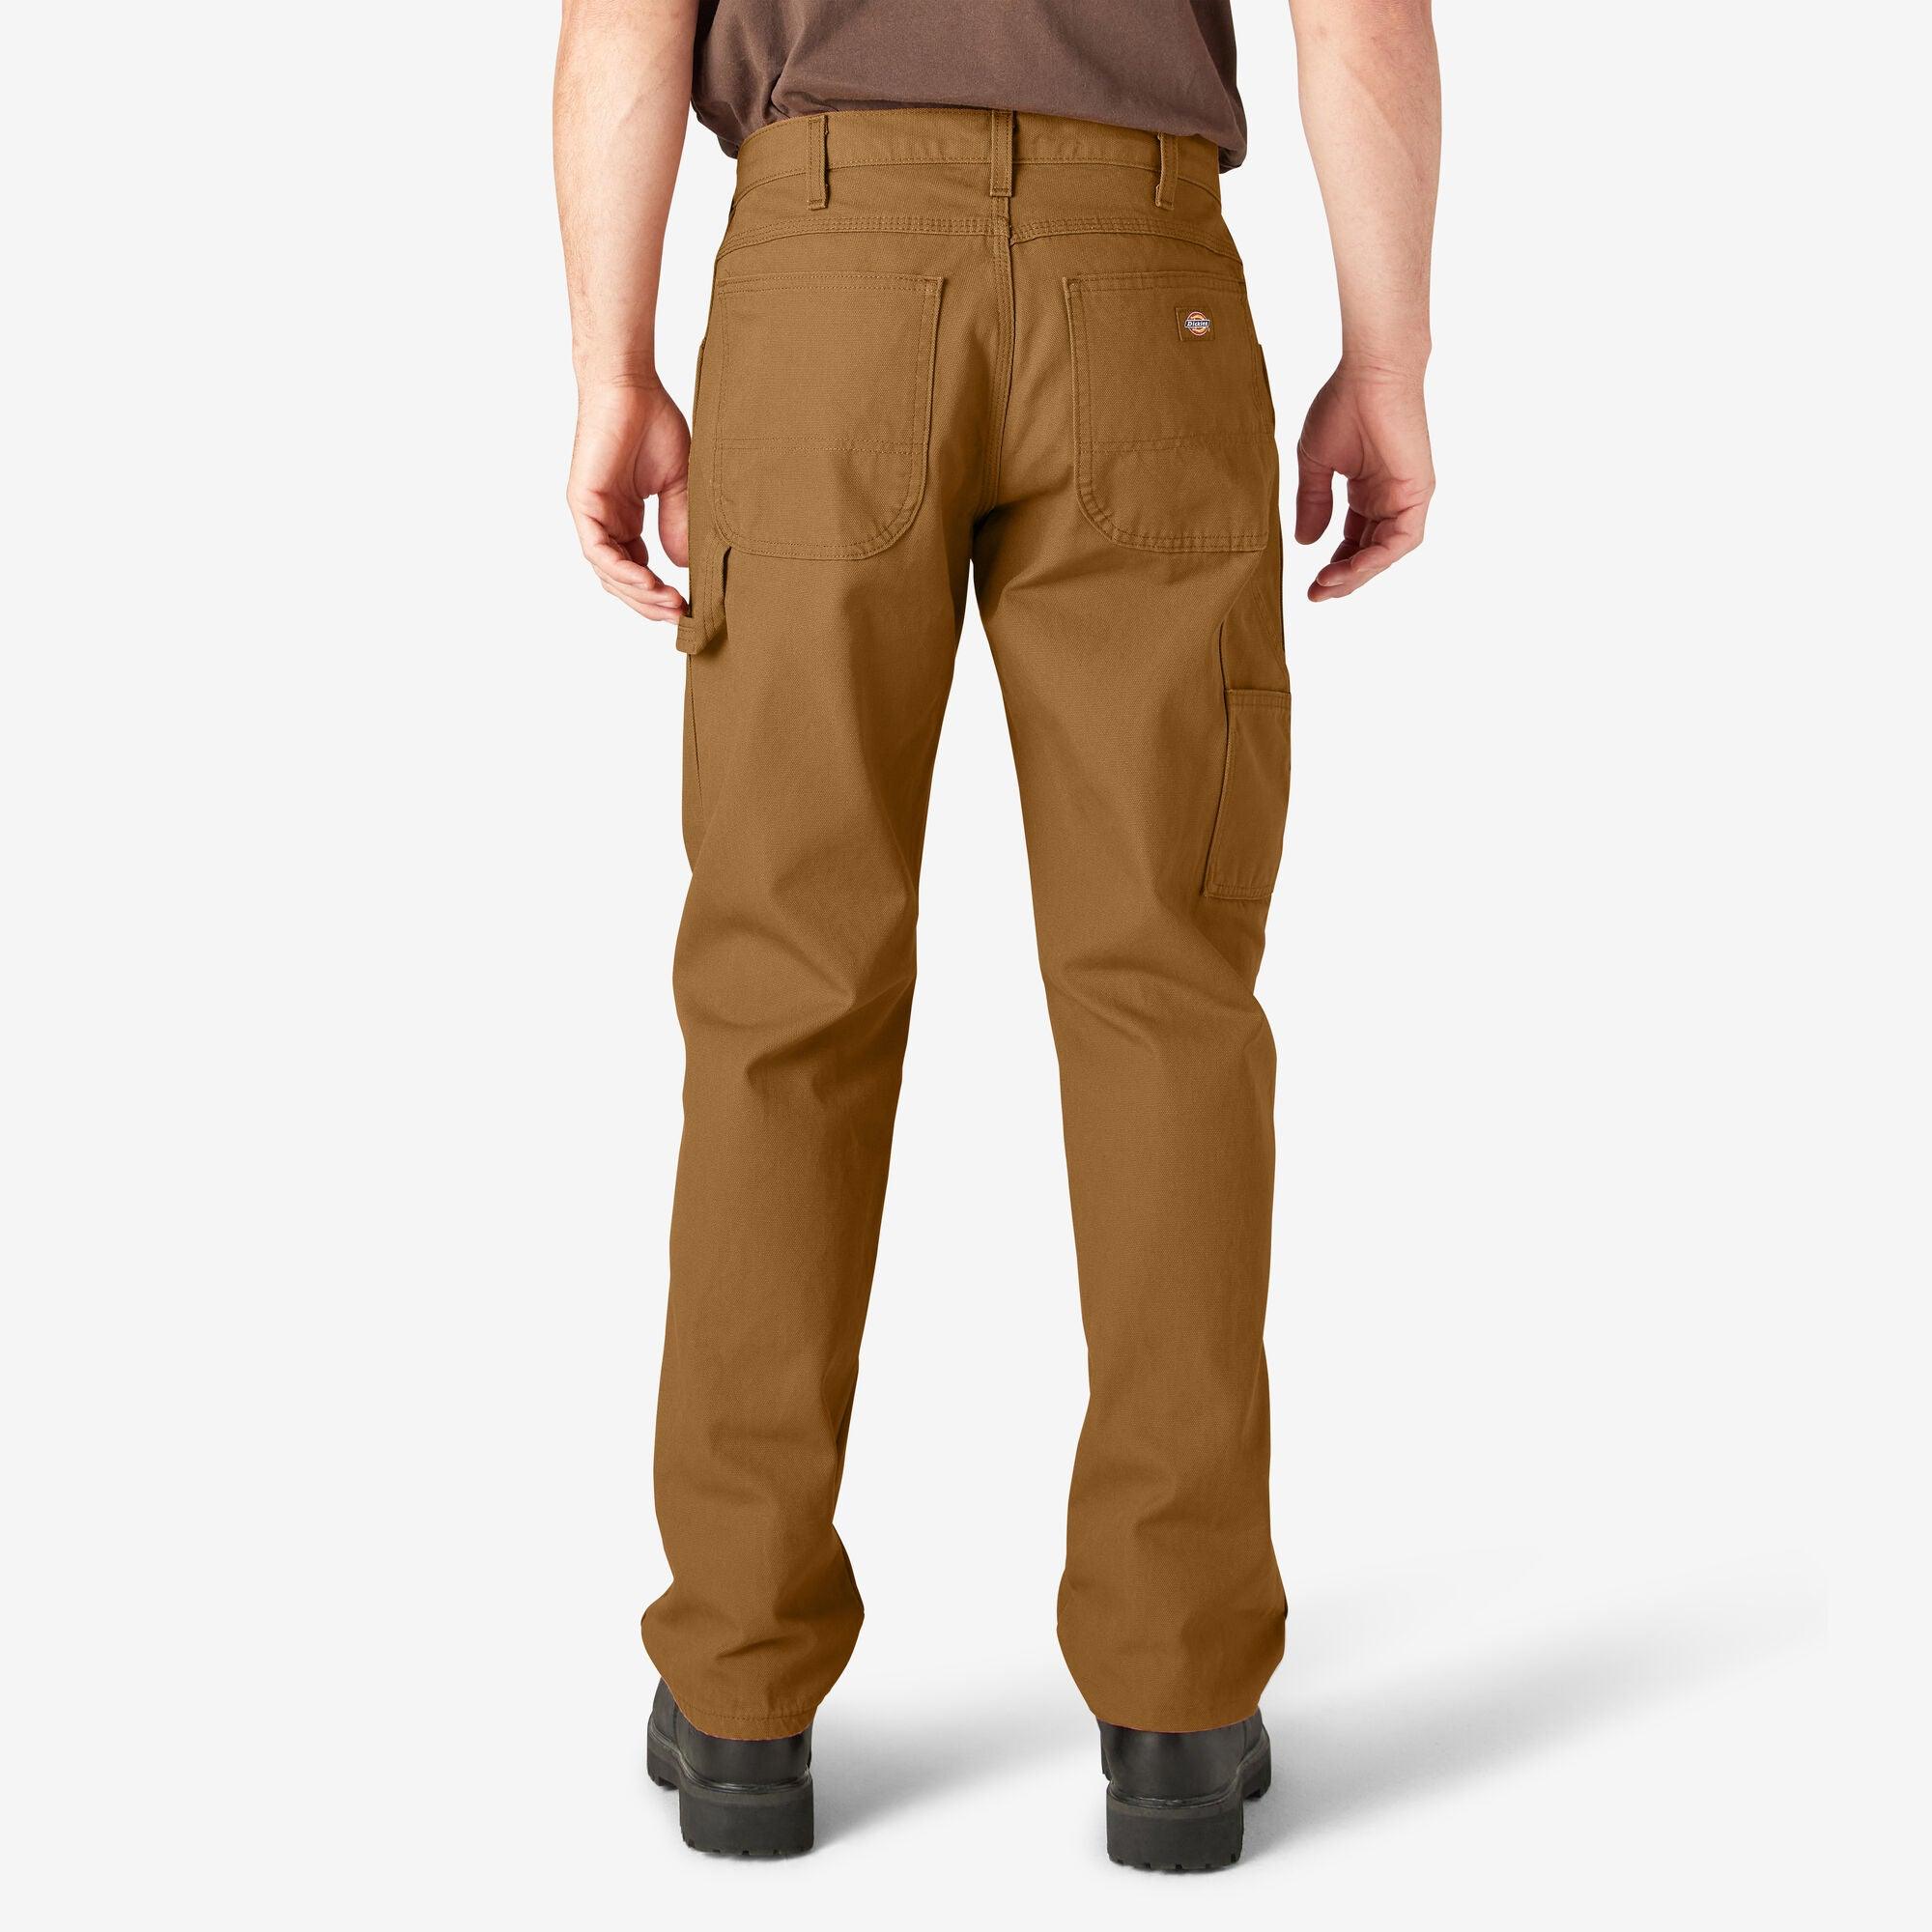 Relaxed Fit Heavyweight Duck Carpenter Pants, Brown Duck - Purpose-Built / Home of the Trades